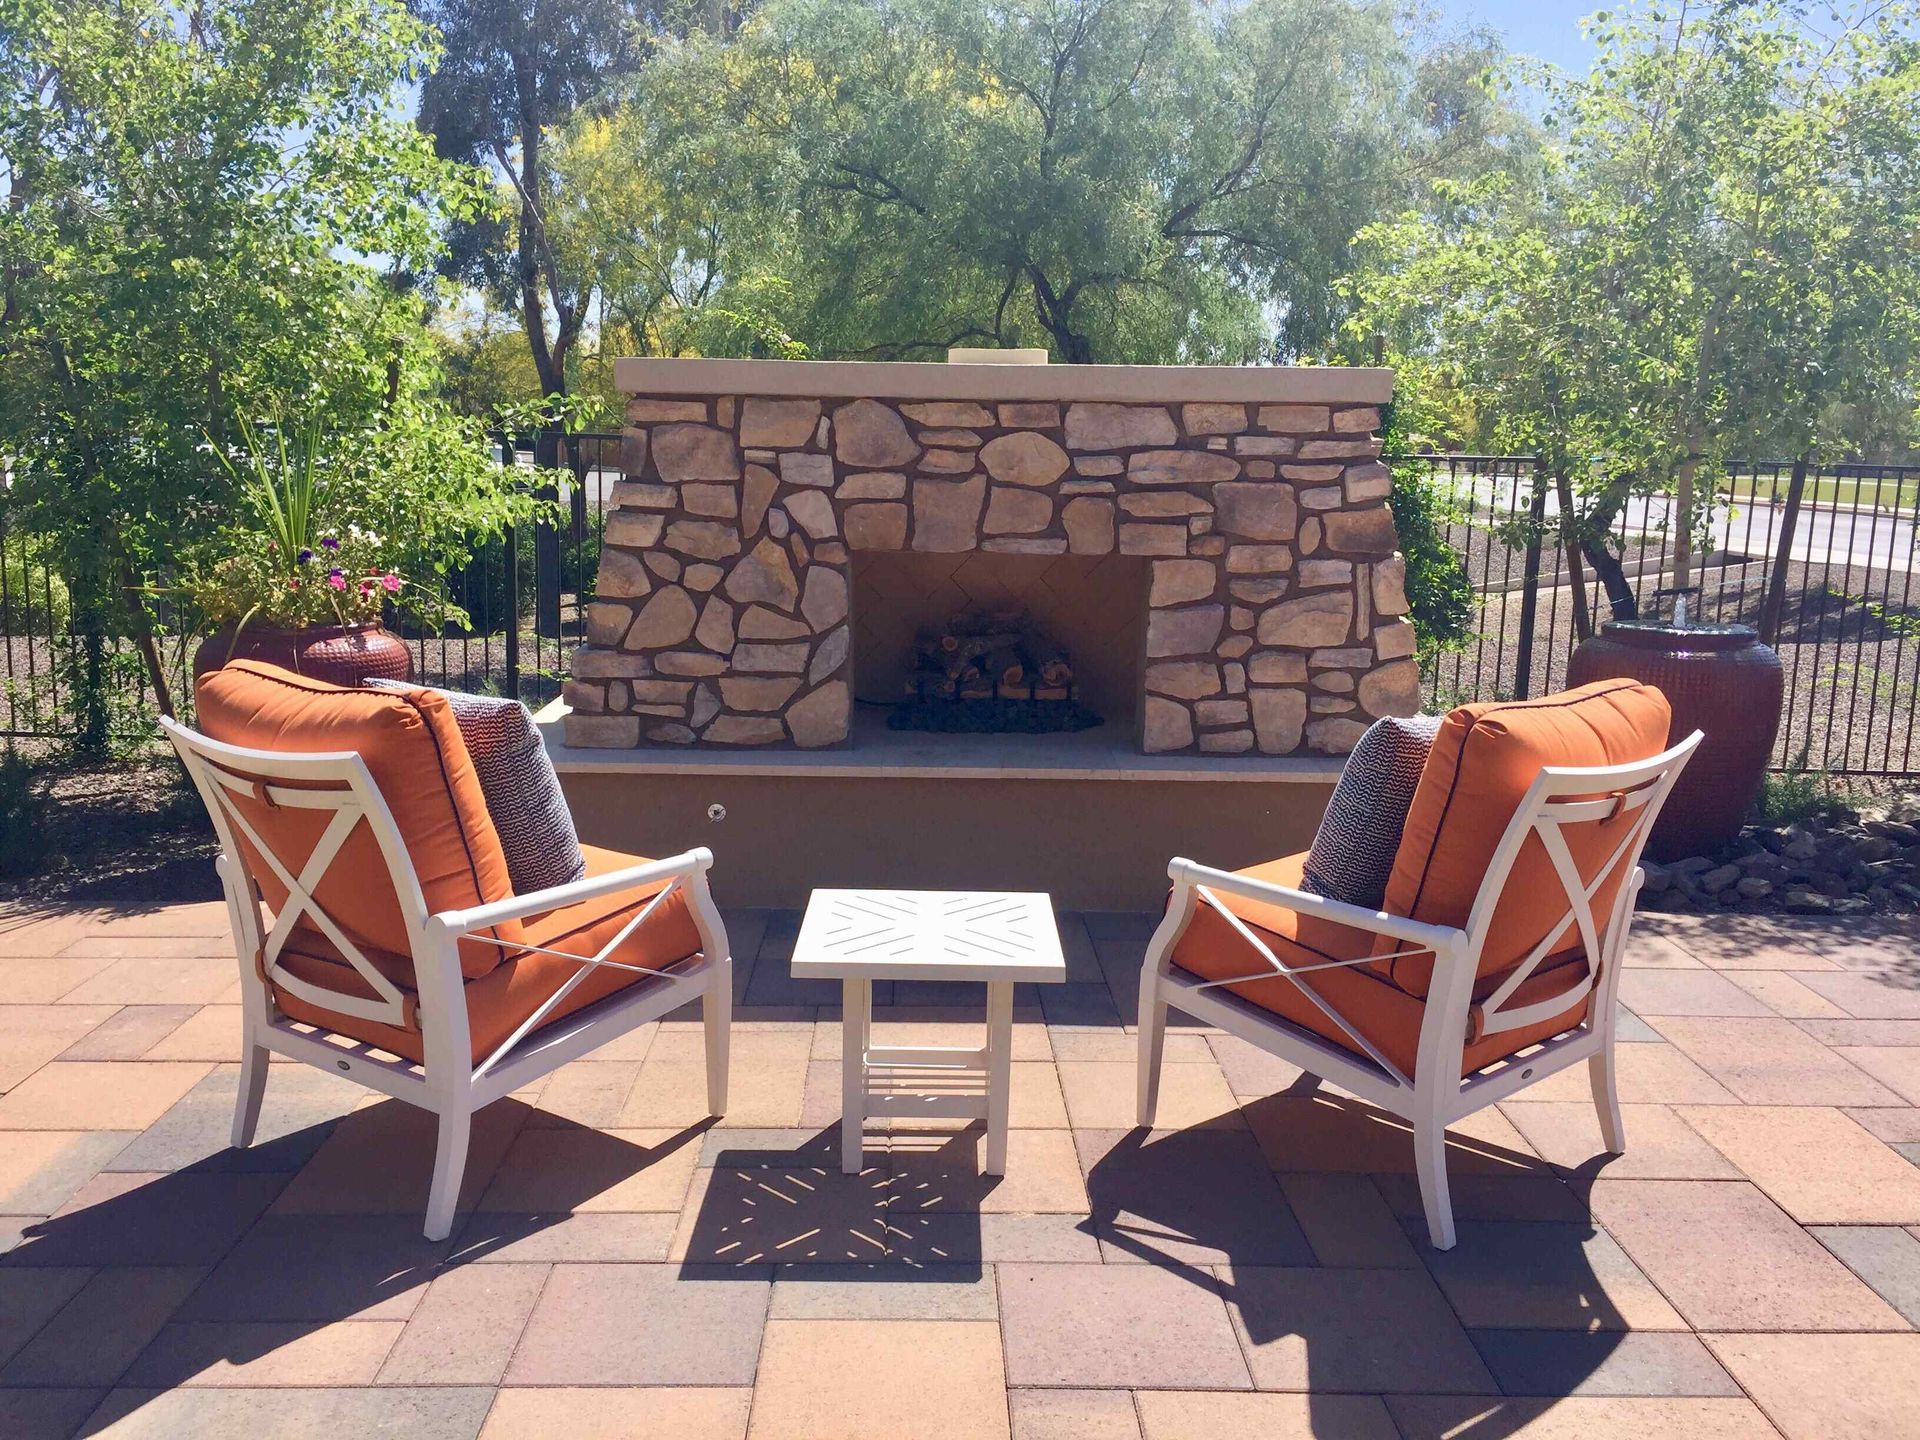 Large Affordable Outdoor Fireplace with Patio And Chairs Surrounded By Trees